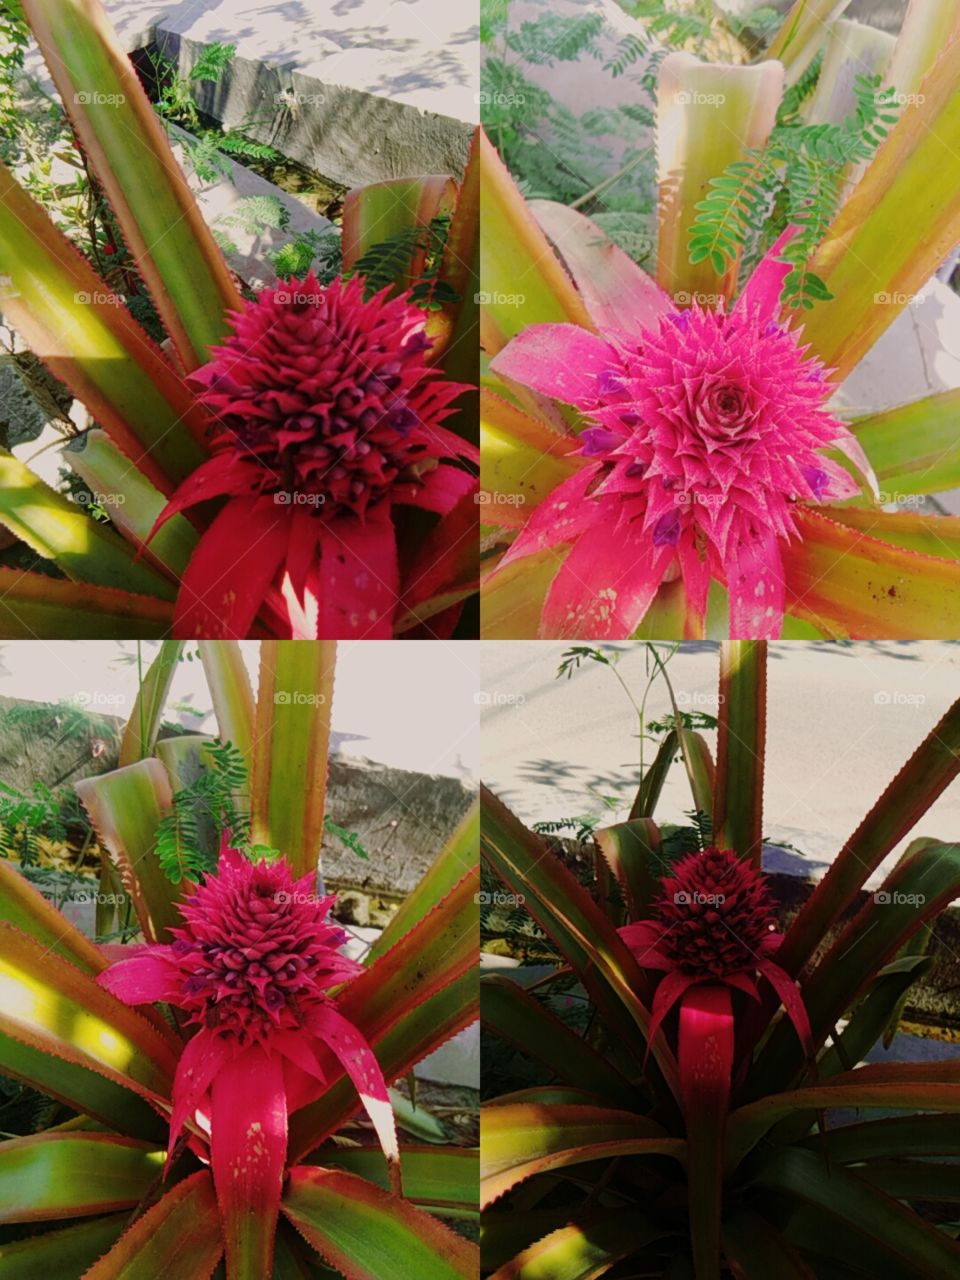 this is a pict of pinapple flower